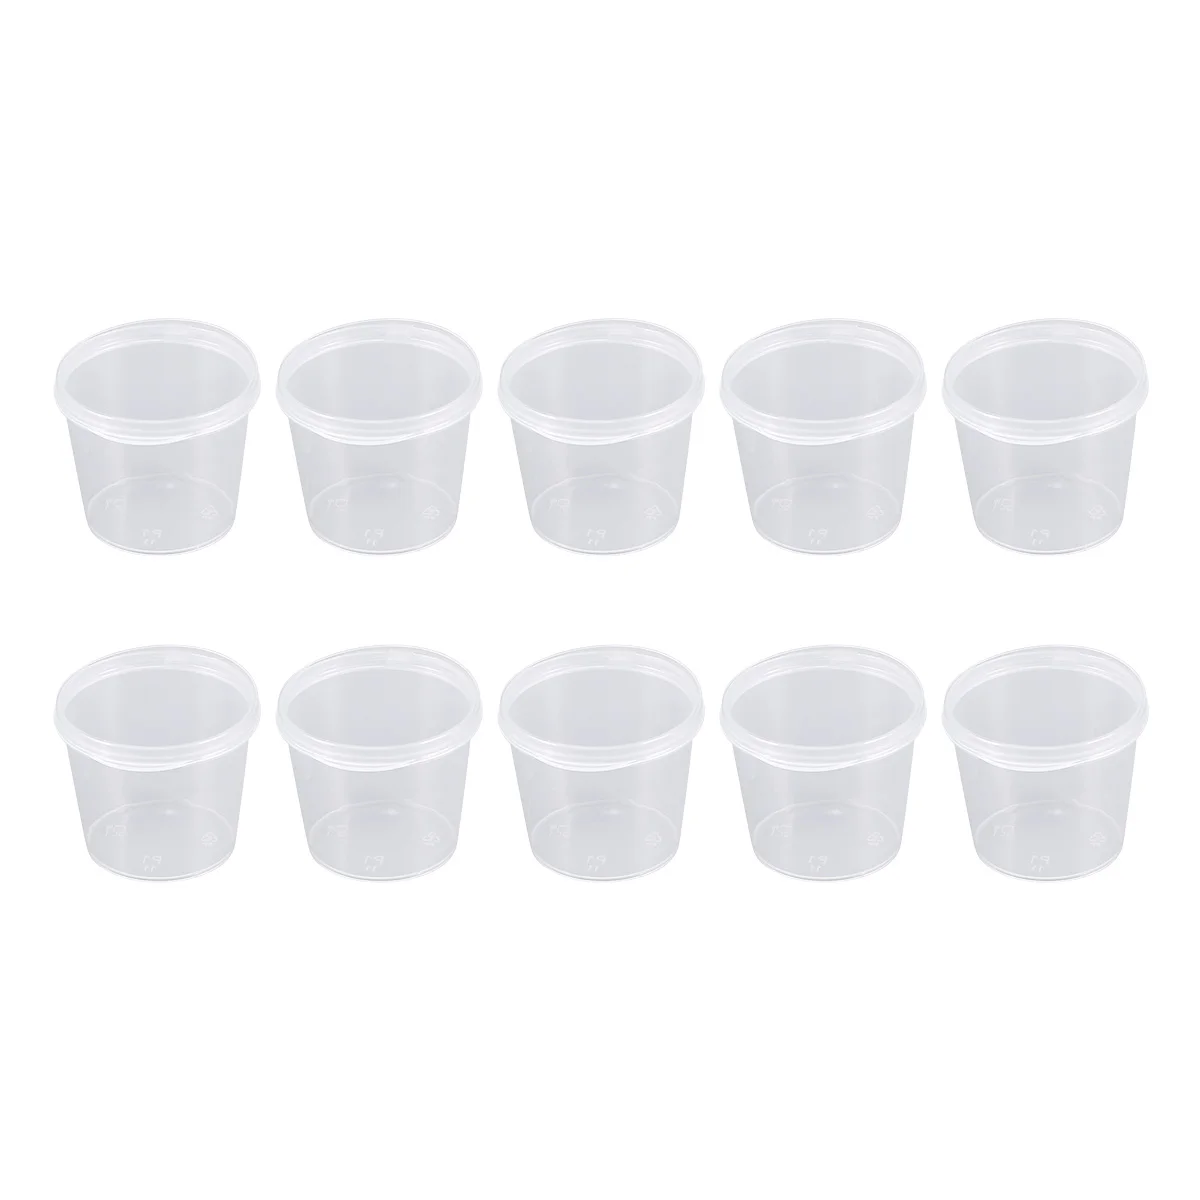 

50PCS Portion Cups With Lids Containers Salad Dressing Cups Condiment Bowl For Sauce Yogurt Jelly Pudding 25ml